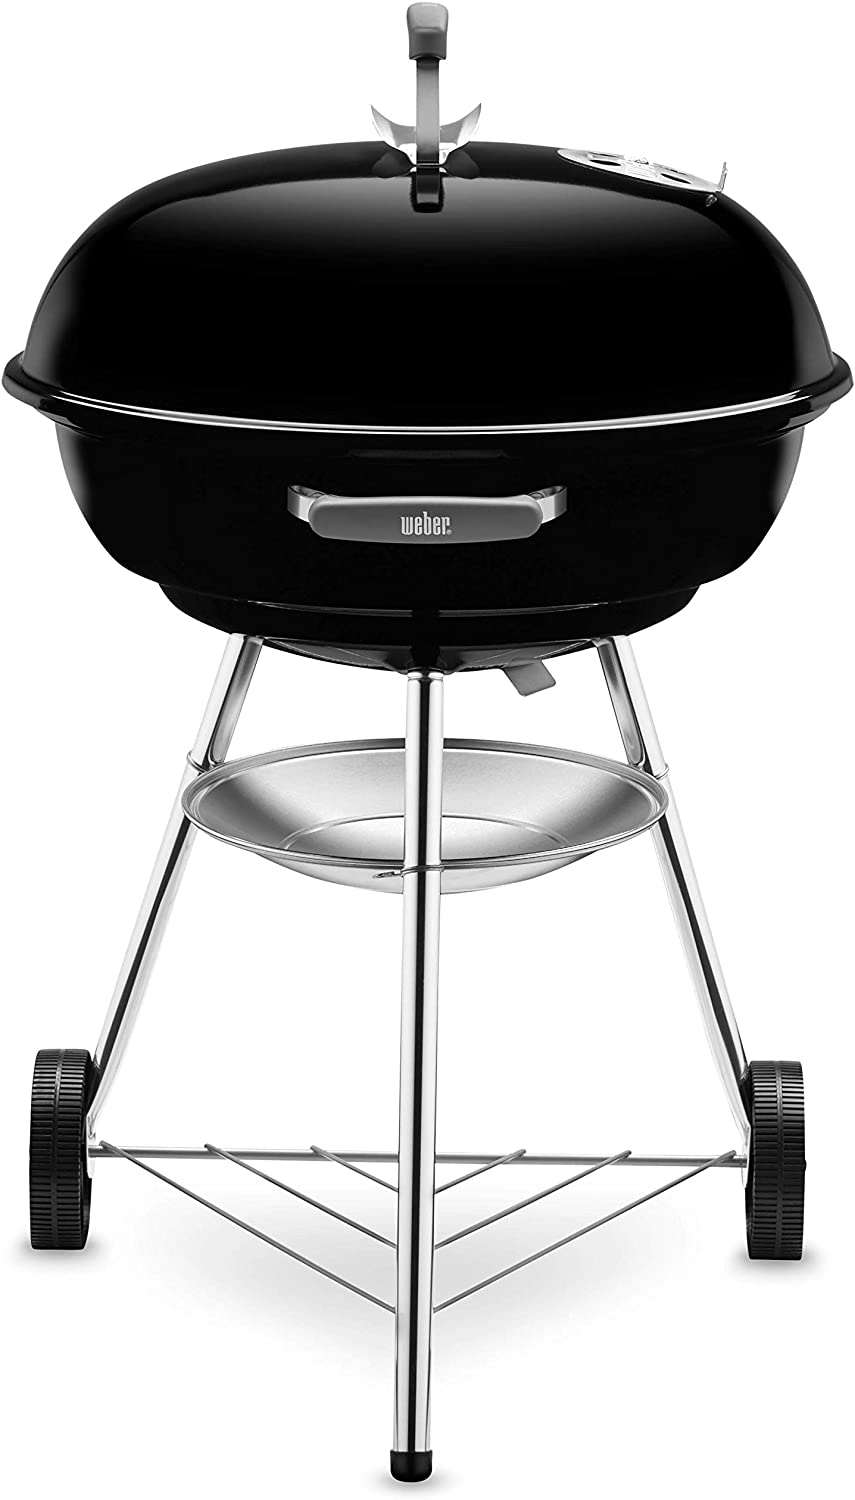 Weber Compact Kettle BBQ, Charcoal Kettle BBQ, Black